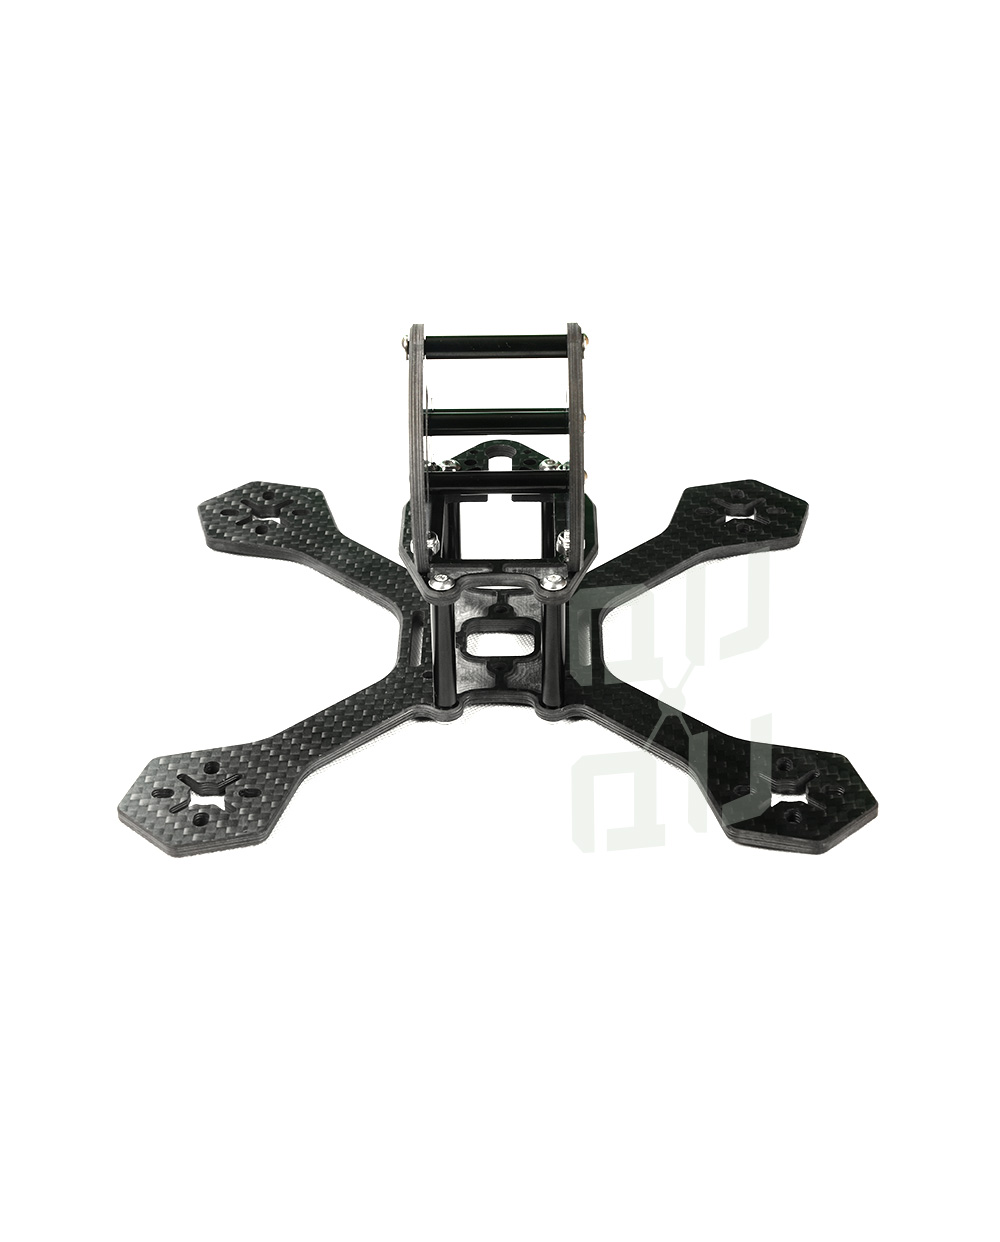 QQ166 4" Racing Drone X-style frame available from QuadQuestions.com front view 2